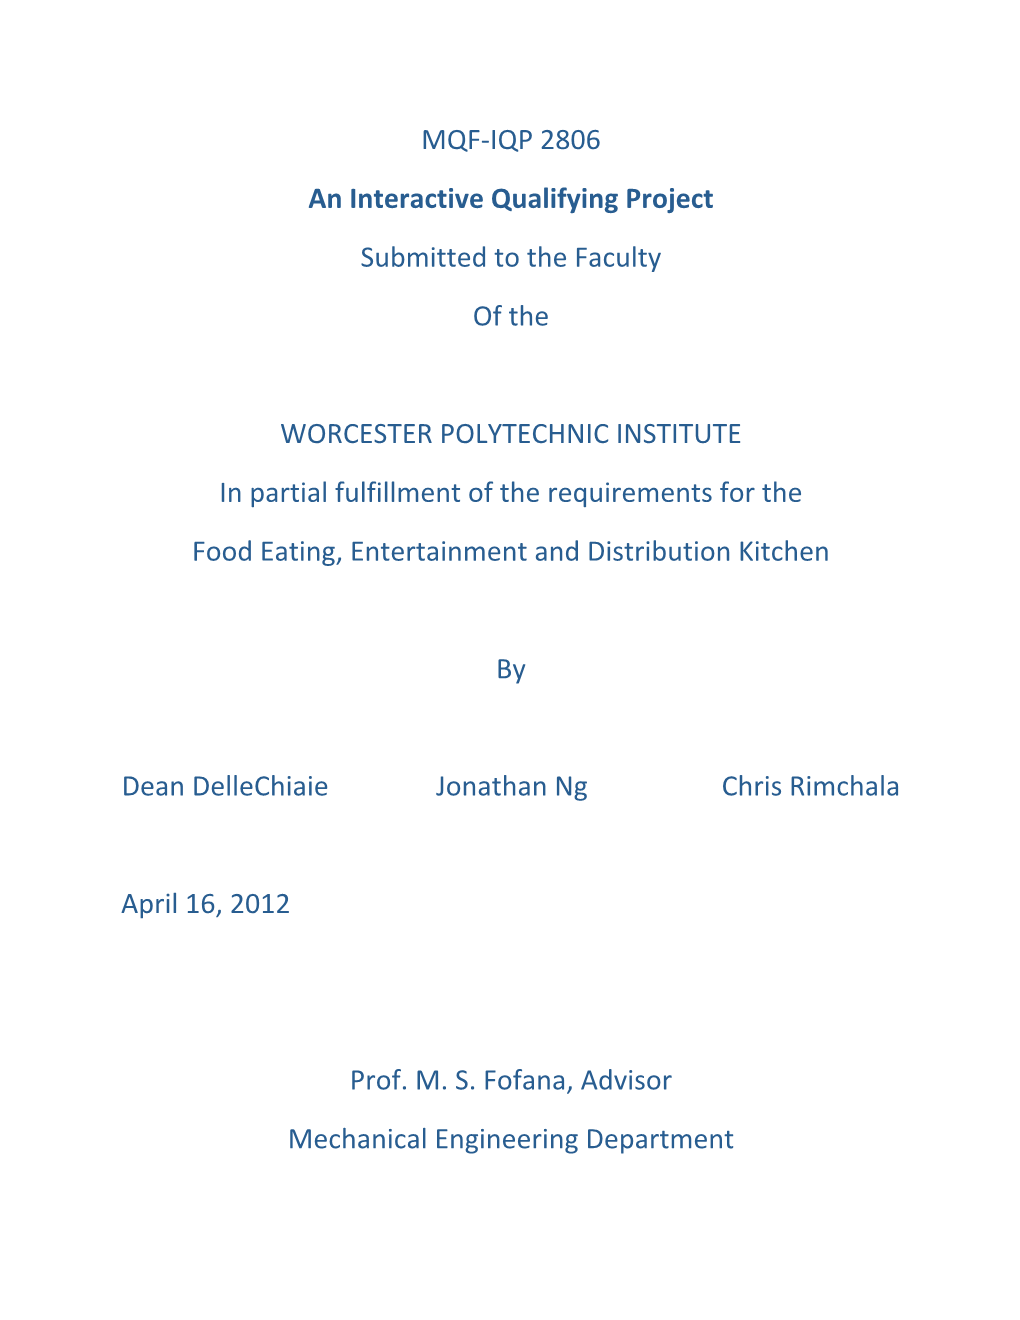 MQF‐IQP 2806 an Interactive Qualifying Project Submitted to the Faculty of The